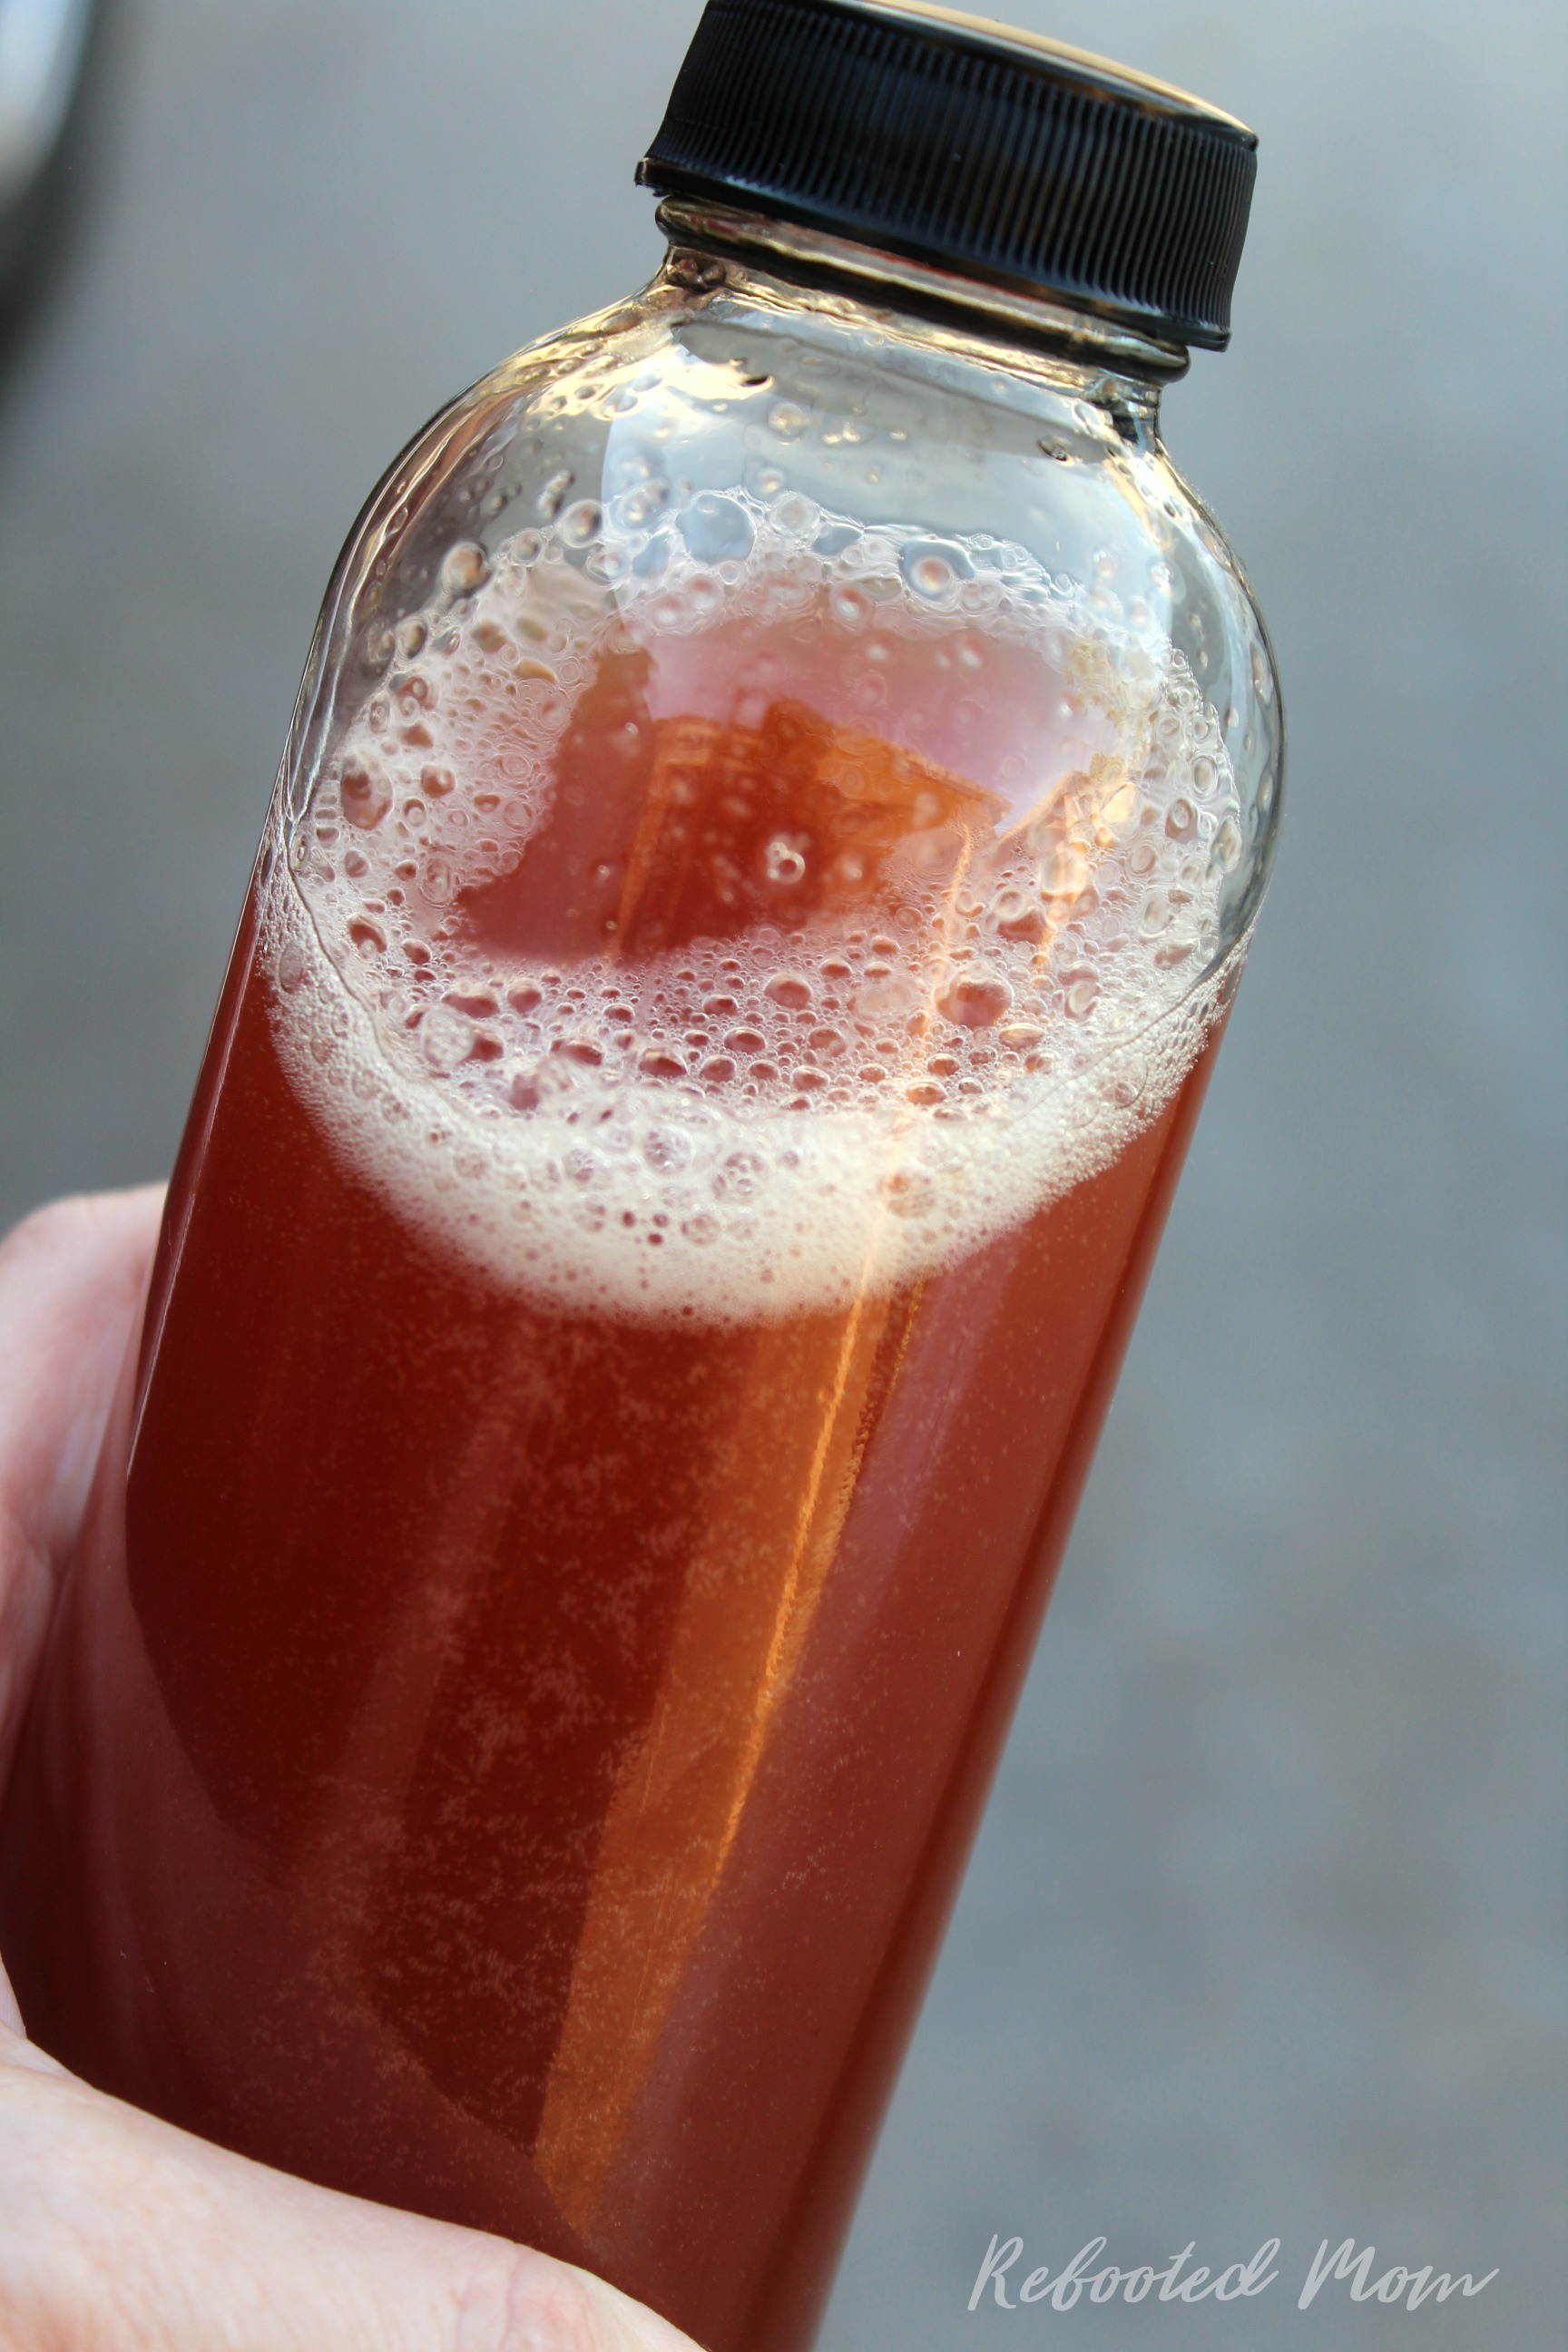 Watermelon Kombucha is the most recent awesome brew that I have tried. Learn how to second ferment your kombucha with a juicy, ripe watermelon!